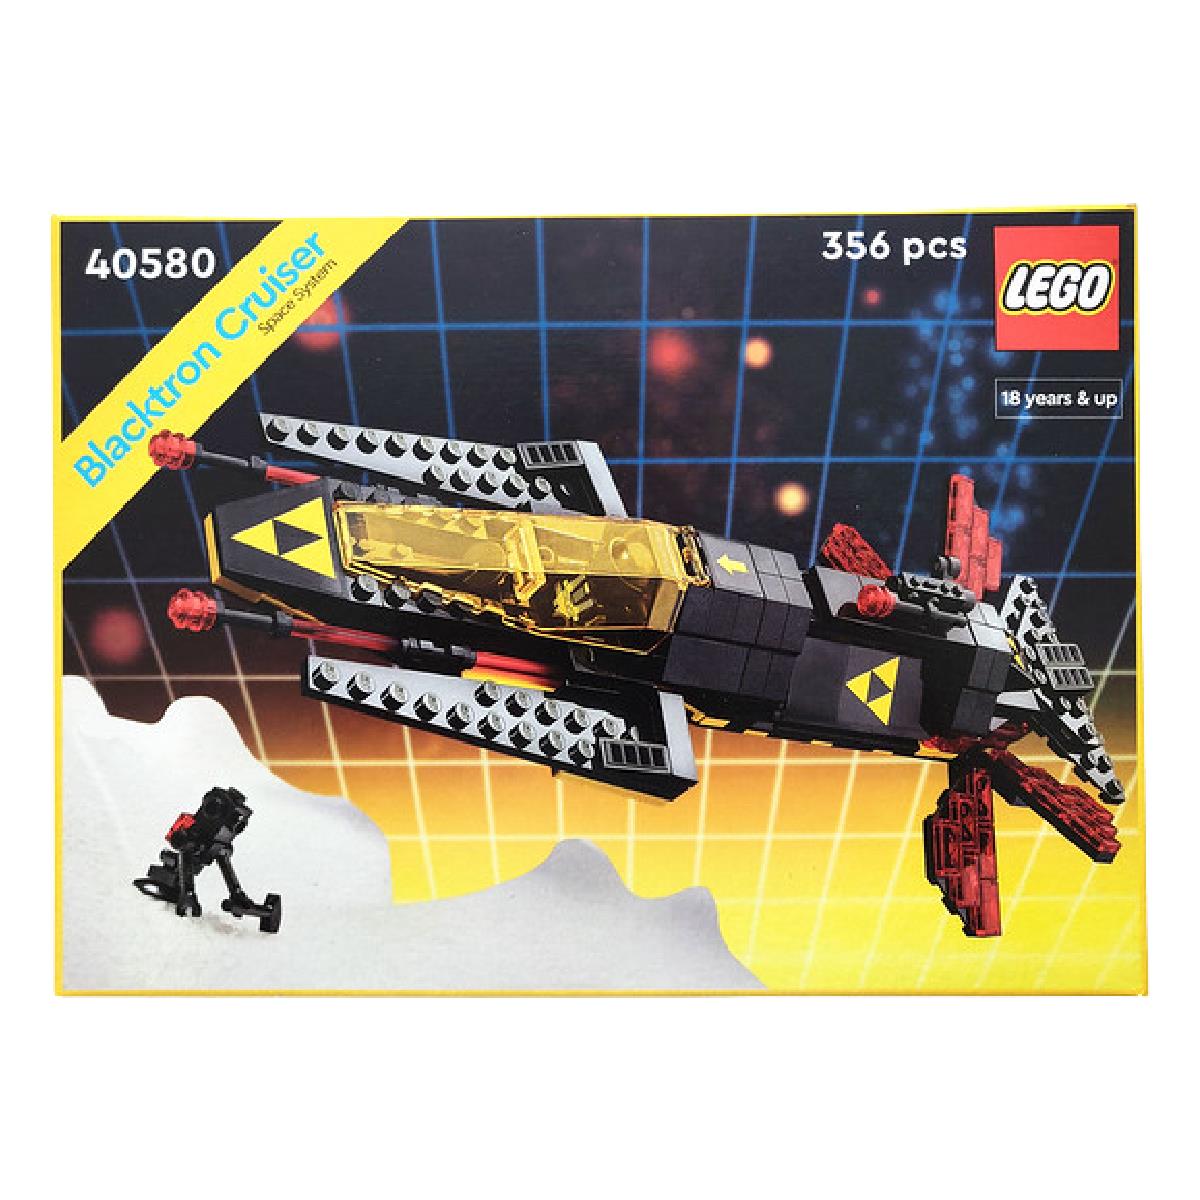 Lego 40580 Blacktron Cruiser Space System Limited Edition Box